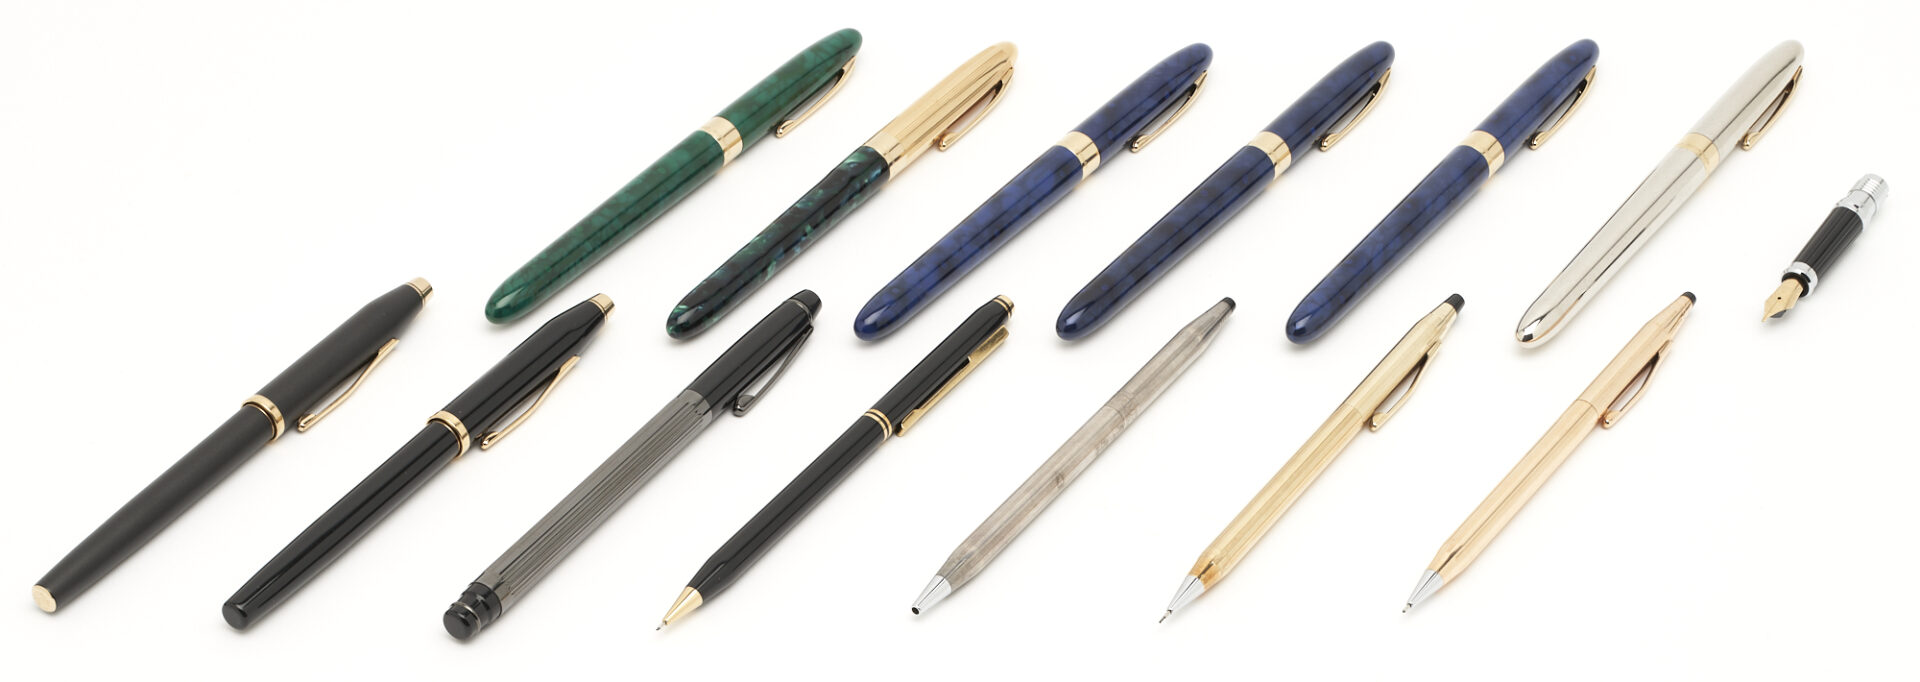 Lot 1134: Collection of 6 Sheaffer Fountain Pens & 8 Cross Writing Instruments